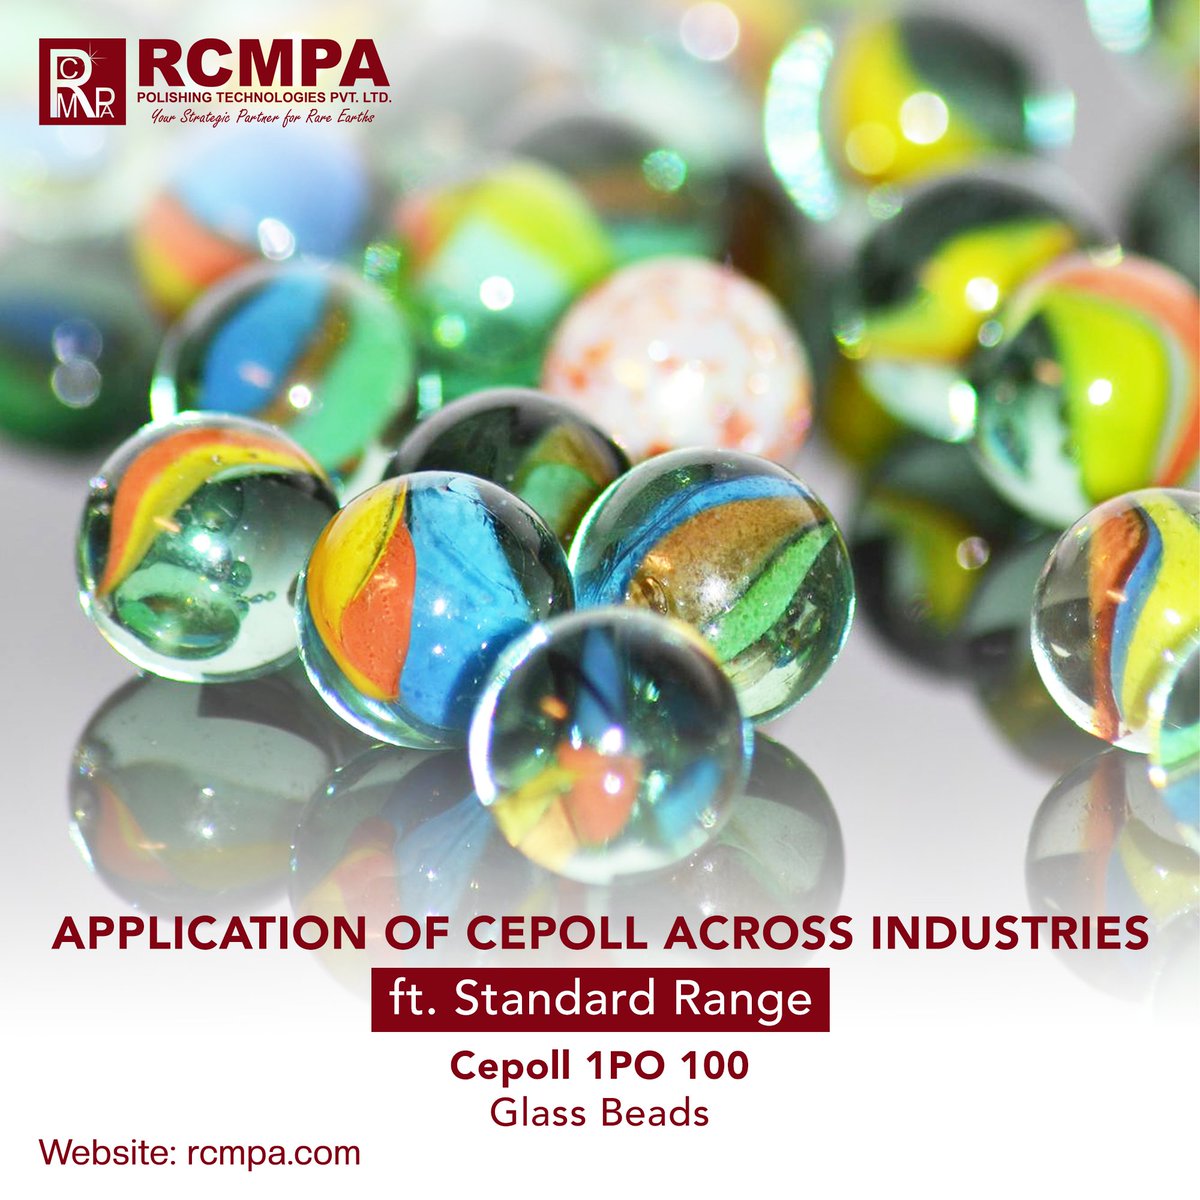 Designed for precision in glass bead applications - Cepoll 1PO 100. Whether it's for decorative or functional purposes, experience guaranteed performance and finesse with the Cepoll Standard range. #Cepoll #CeriumPolishingPowder #Rcmpa #rareearth #Madeinindia #Makeinindia